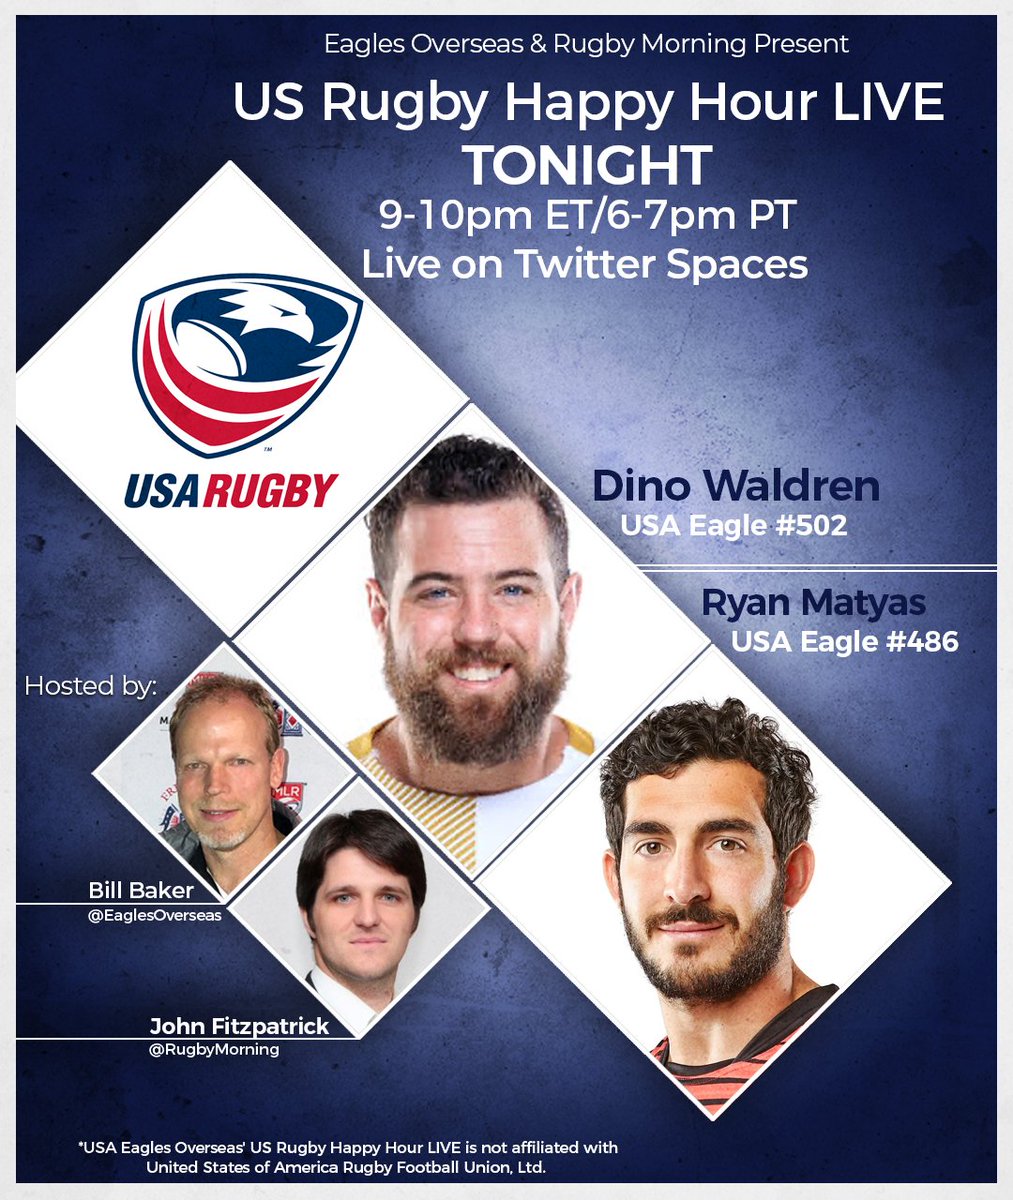 We're walking through the US Rugby Happy Hour LIVE pub doors in a few hours. Grab a seat, lets talk with @RyanMatyas1 and Dino Waldren about their careers and @USARugby! Join the conversation LIVE! #TwitterSpaces ⏰ Wednesday, 9:00pm ET/6:00pm PT 📱twitter.com/i/spaces/1kvKp…